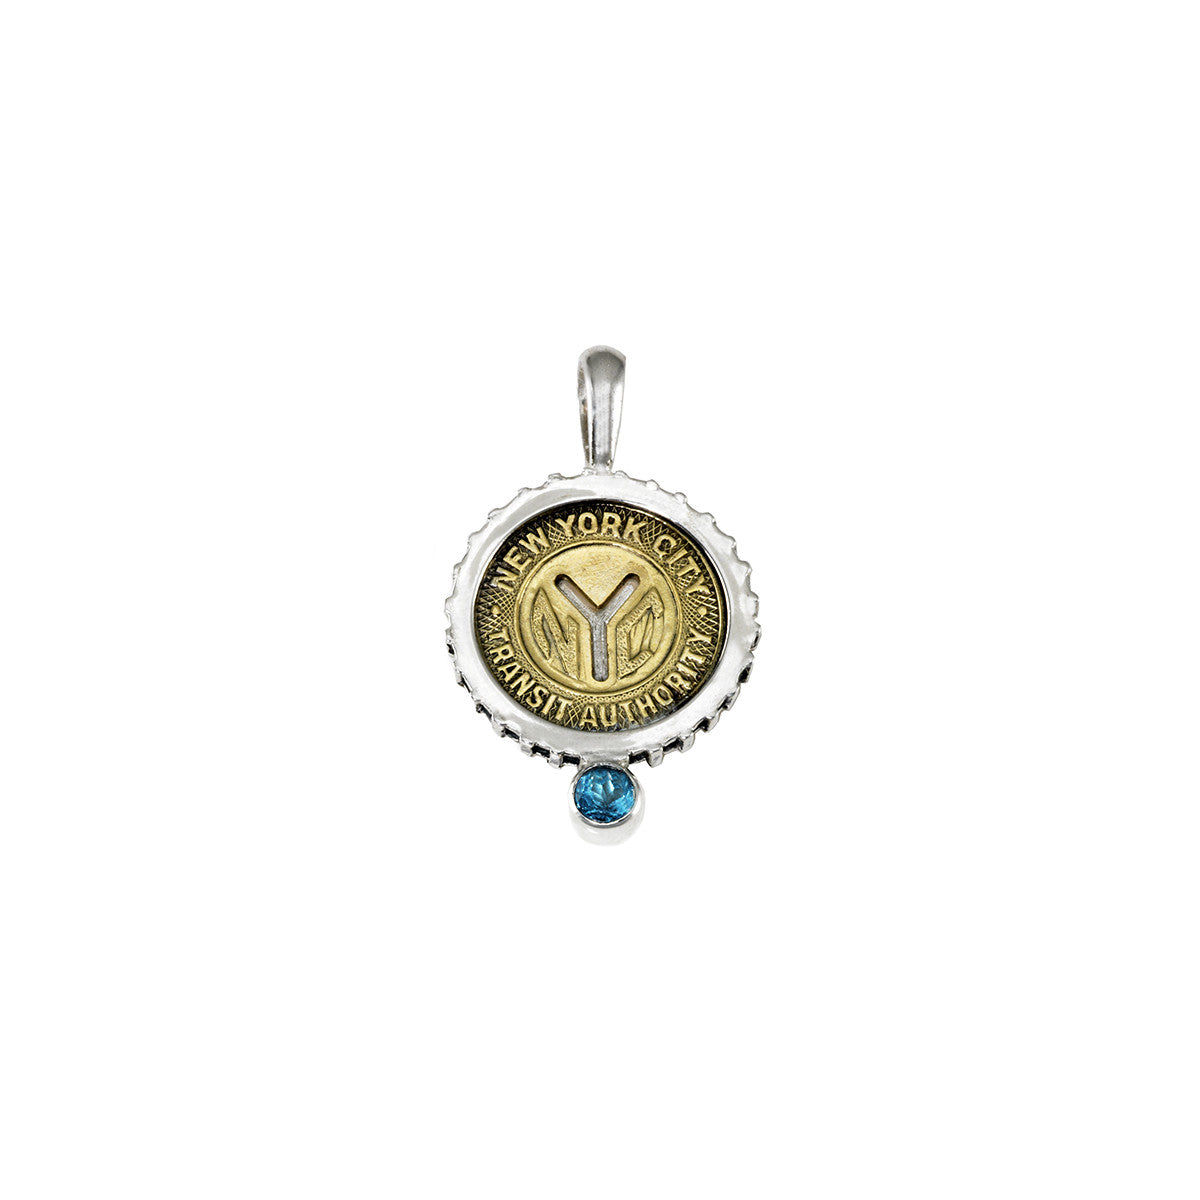 March NYC Authentic Subway Token Blue Topaz Sterling Silver Charm Necklace - Cynthia Gale New York - 1